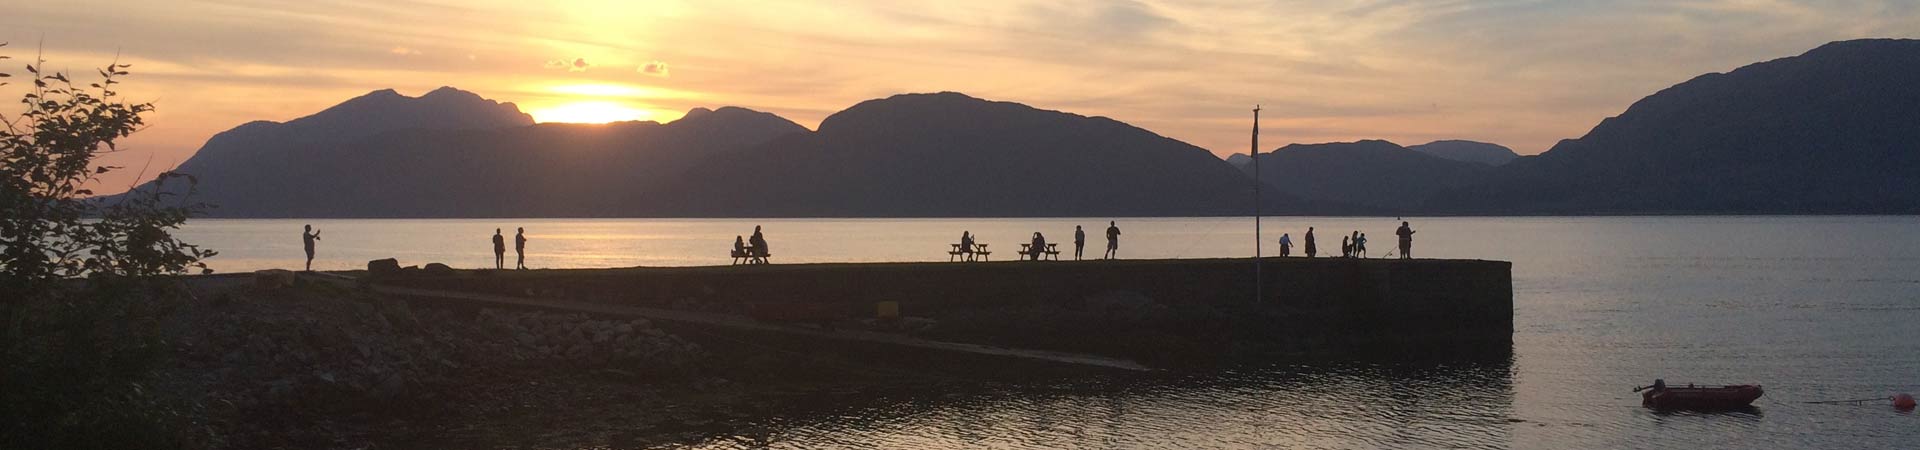 Photo showing a Scottish scene at dusk with people on a pier